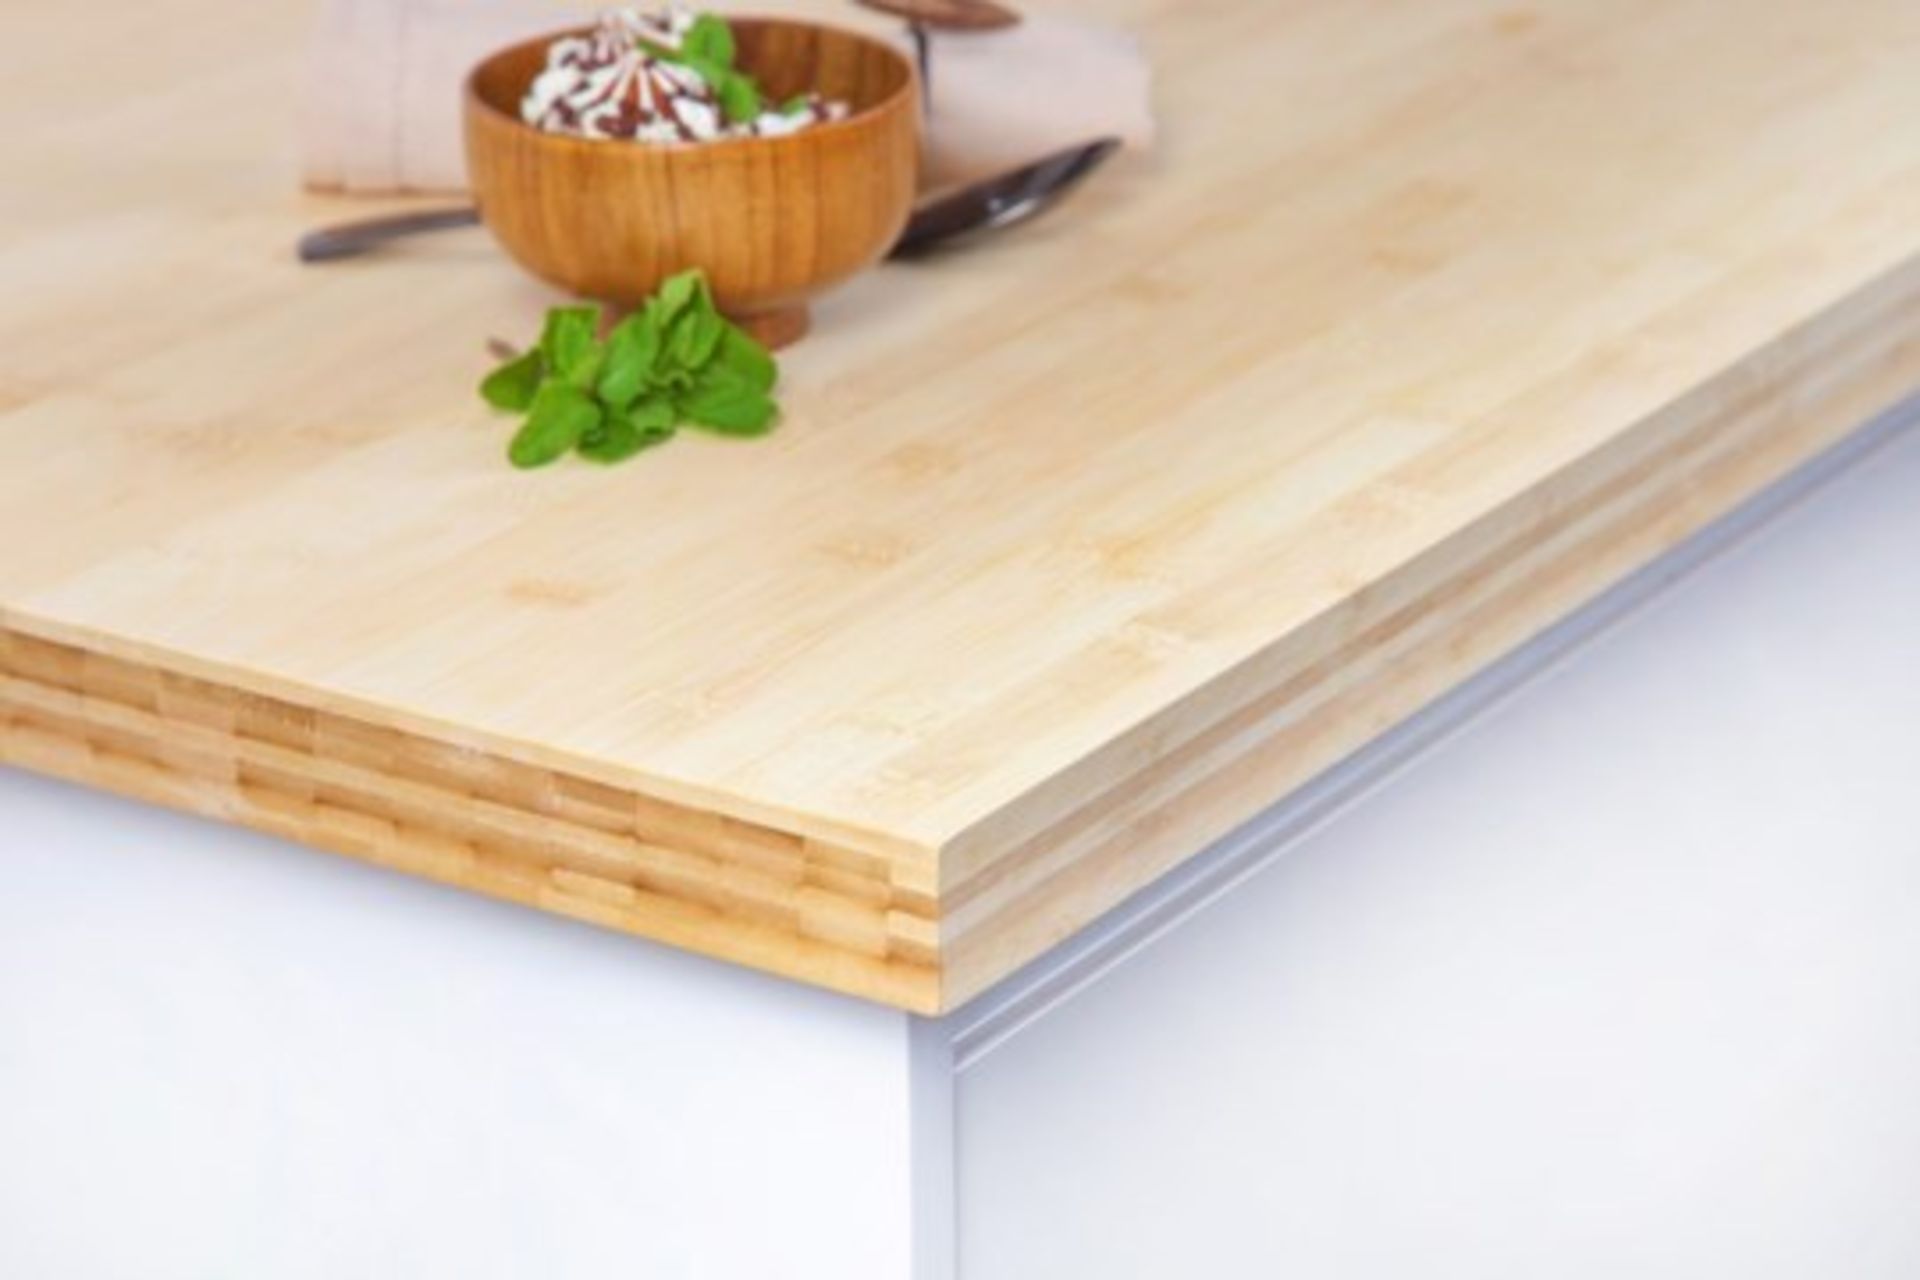 1 x Layered Solid Bamboo Wood Worktop - Size: 3000 x 900 x 40mm - Ideal For Kitchens, Countertops,